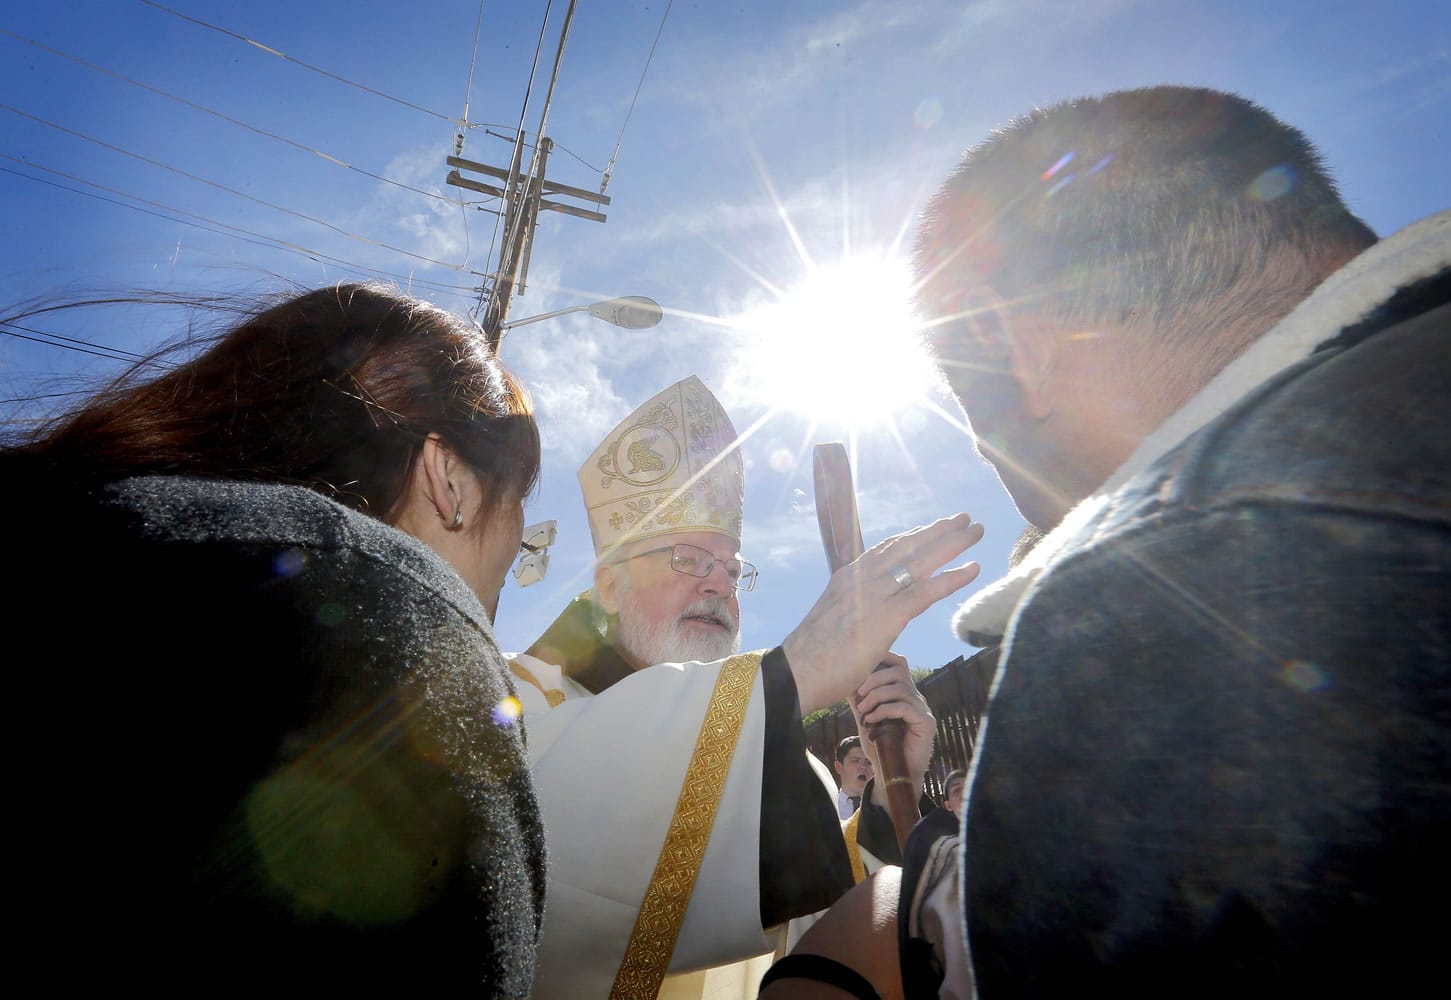 Cardinal Sean O'Malley blesses a family after mass Tuesday along the international border wall in Nogales, Ariz.